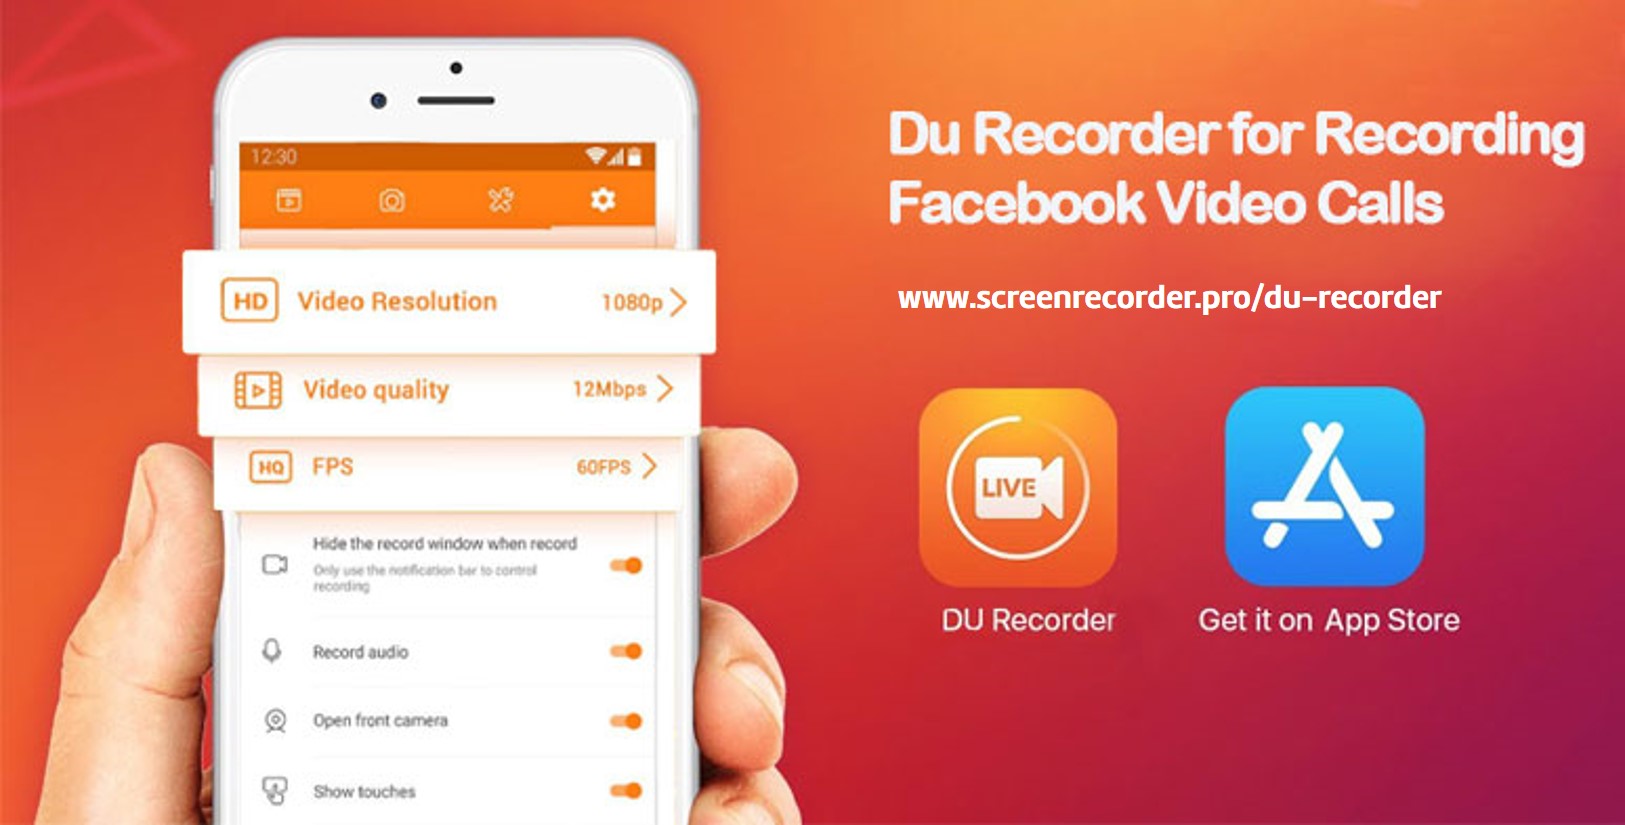 DU Recorder | Free screen recorder tool that offers various added functionalities